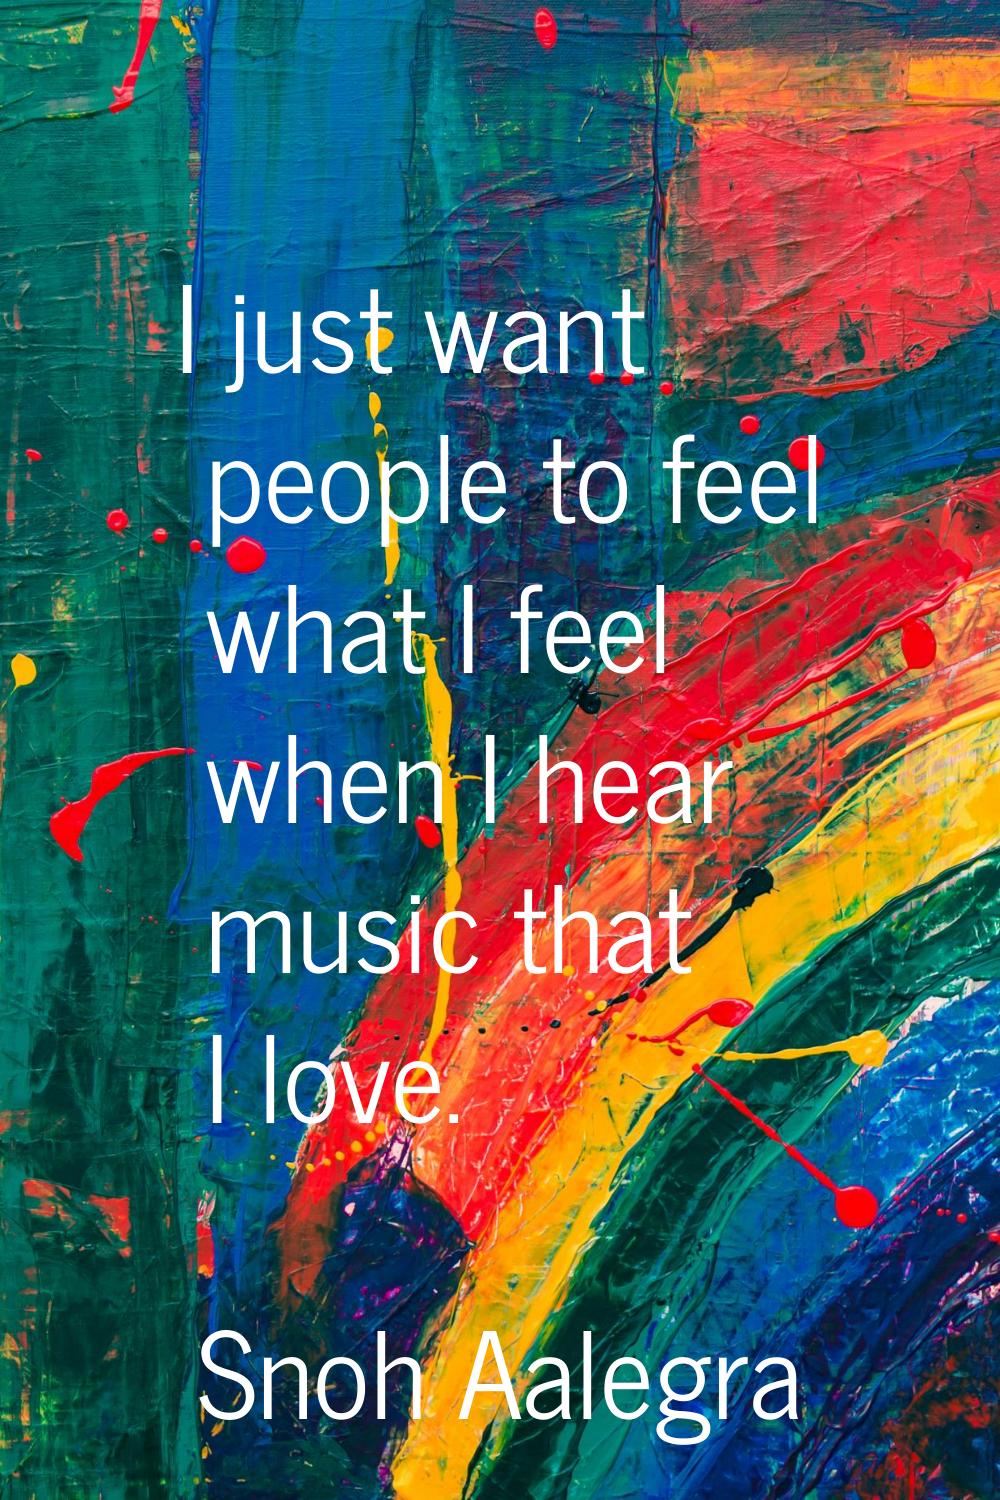 I just want people to feel what I feel when I hear music that I love.